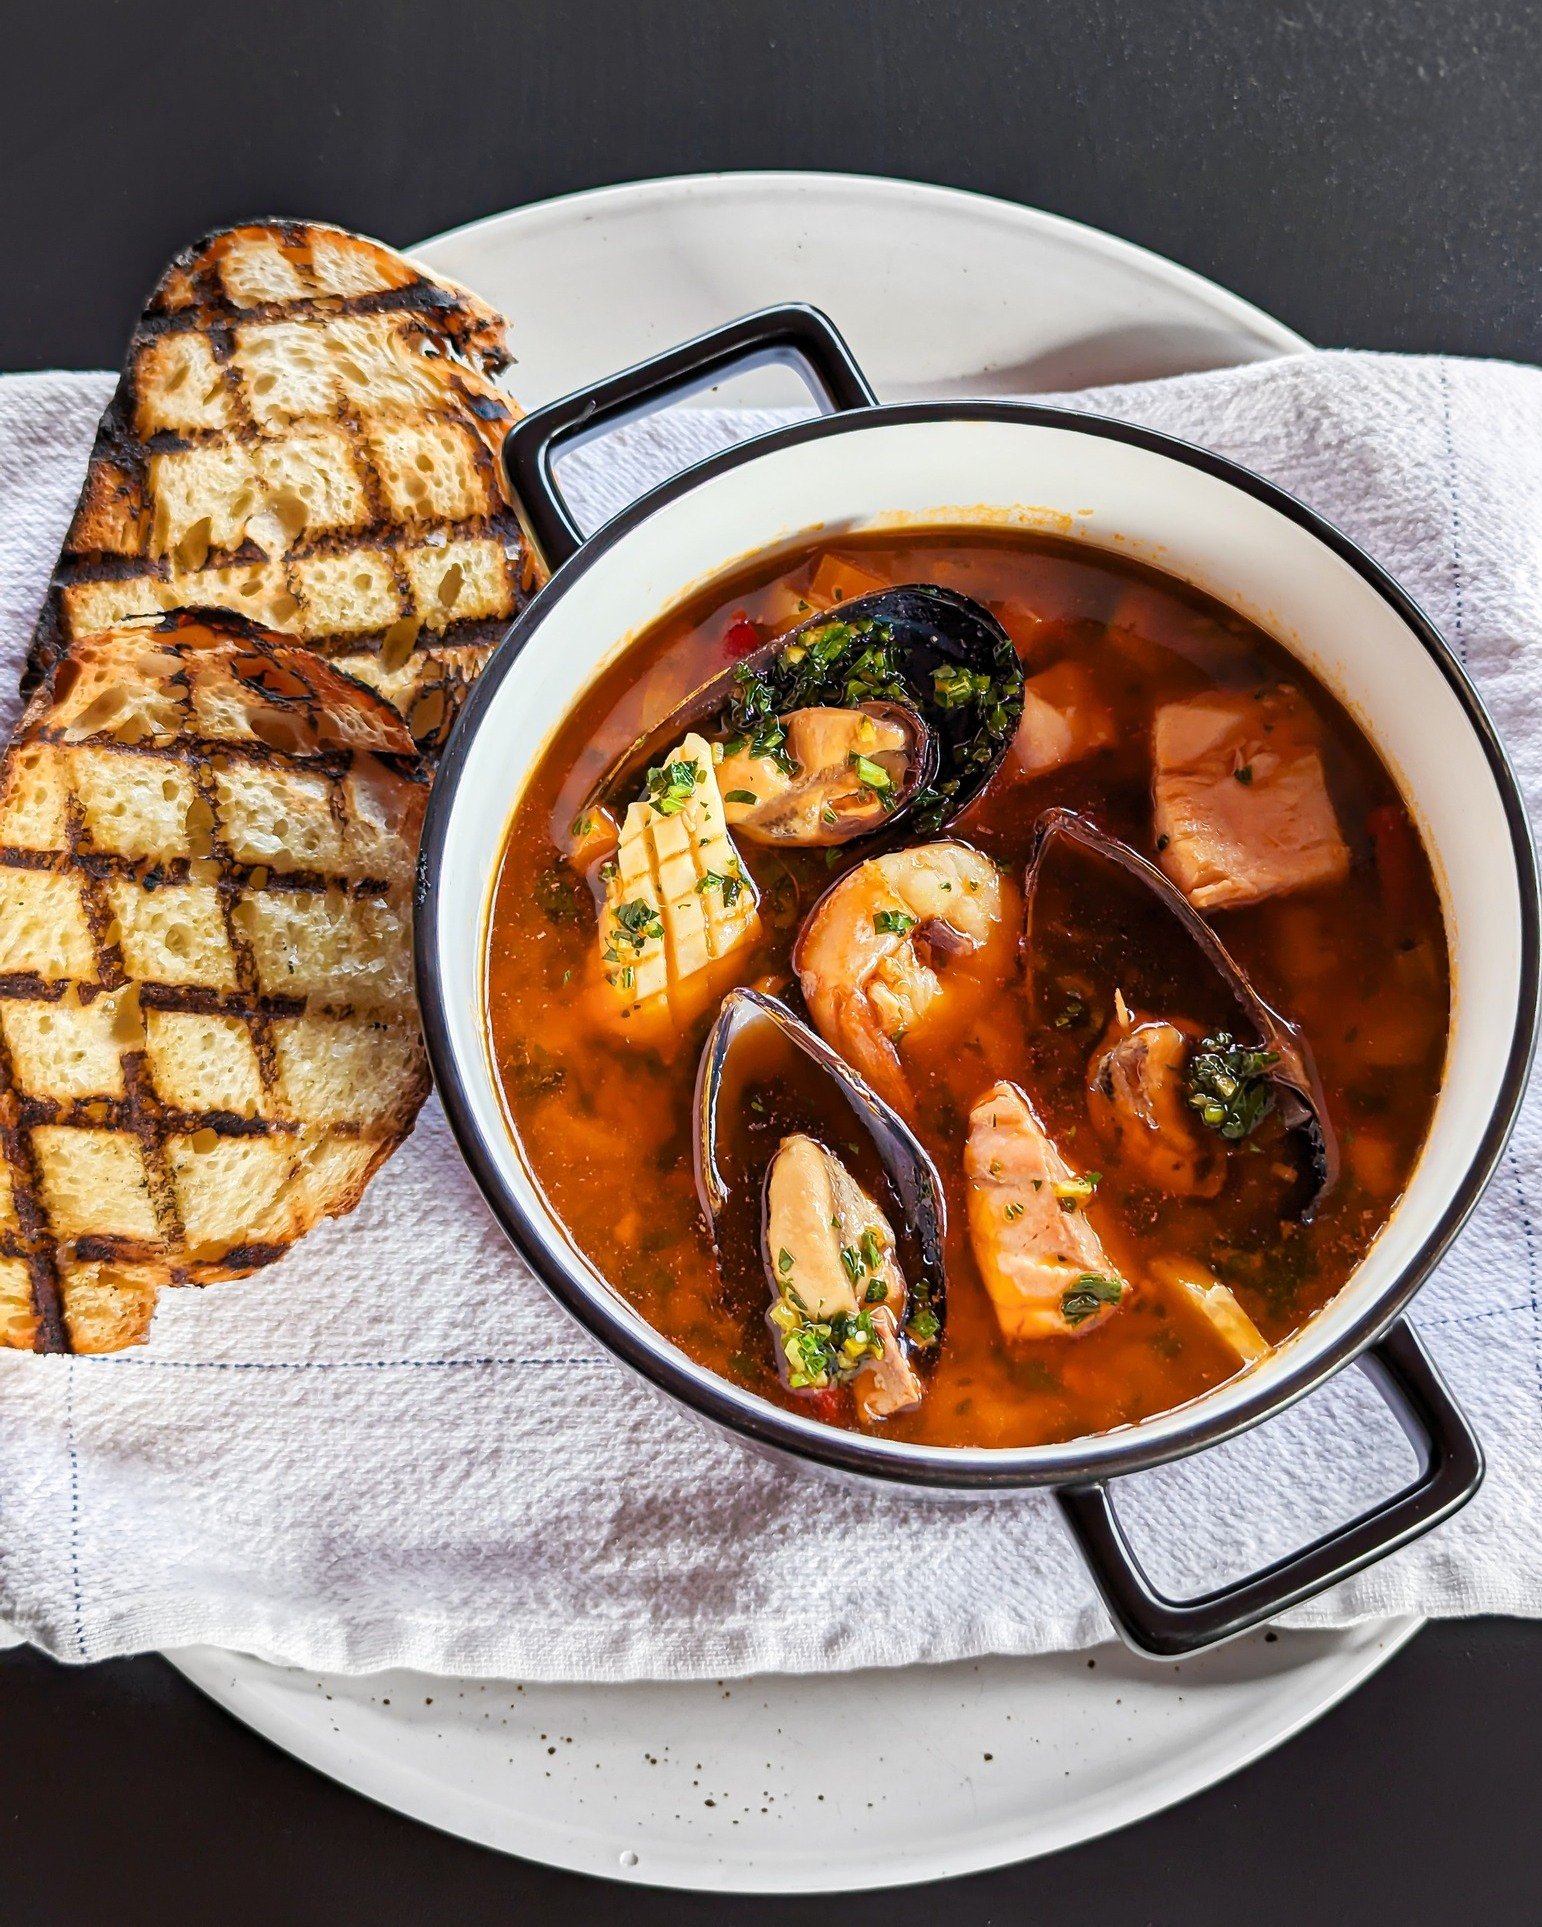 That wintery weather has started to hit, so we&rsquo;re warming up the menu at #MuresUpperDeck!
.
📸: Australian Seafood Stockpot
Premium seafood, white wine, fish stock, fennel, smoked paprika, chorizo, roasted peppers, gremolata and grilled sourdou